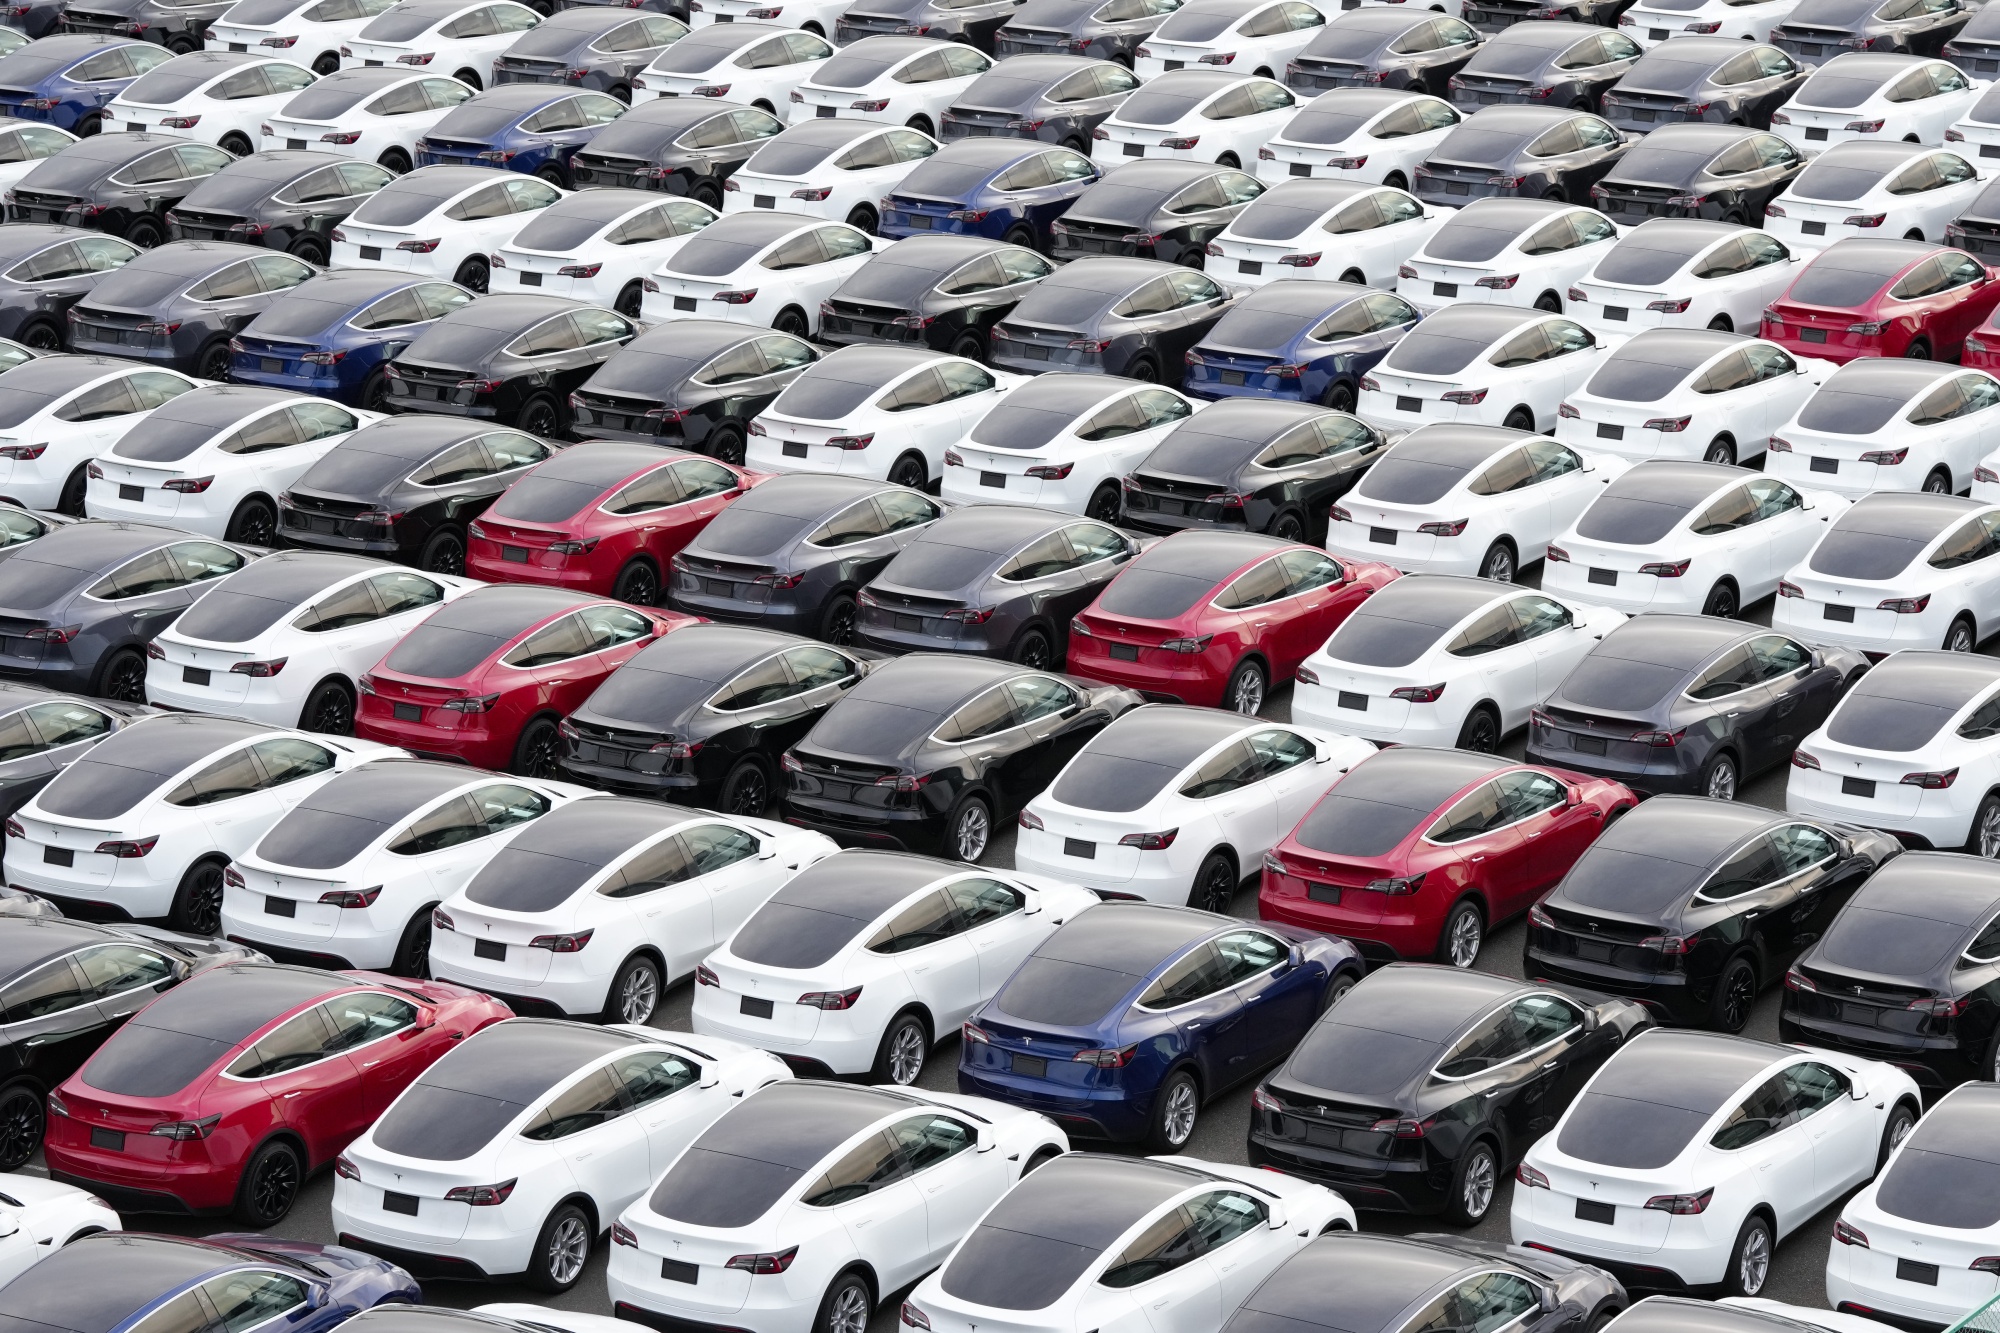 Tesla vehicles parked after arriving at the port in Yokohama, Japan, in October.